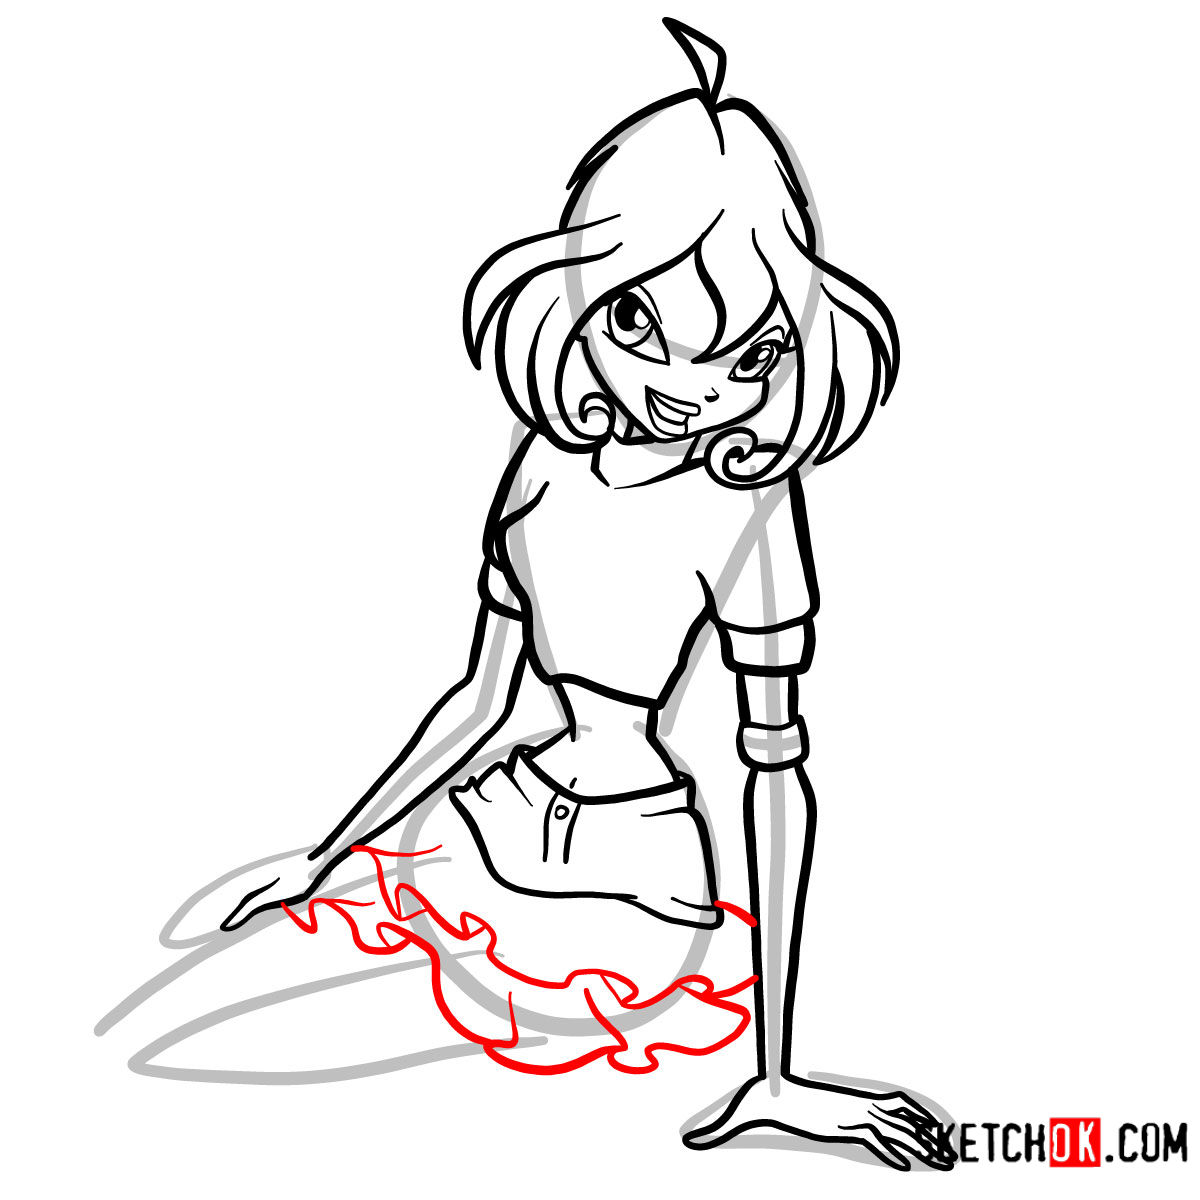 How to draw Bloom fire fairy sitting and smiling - step 09